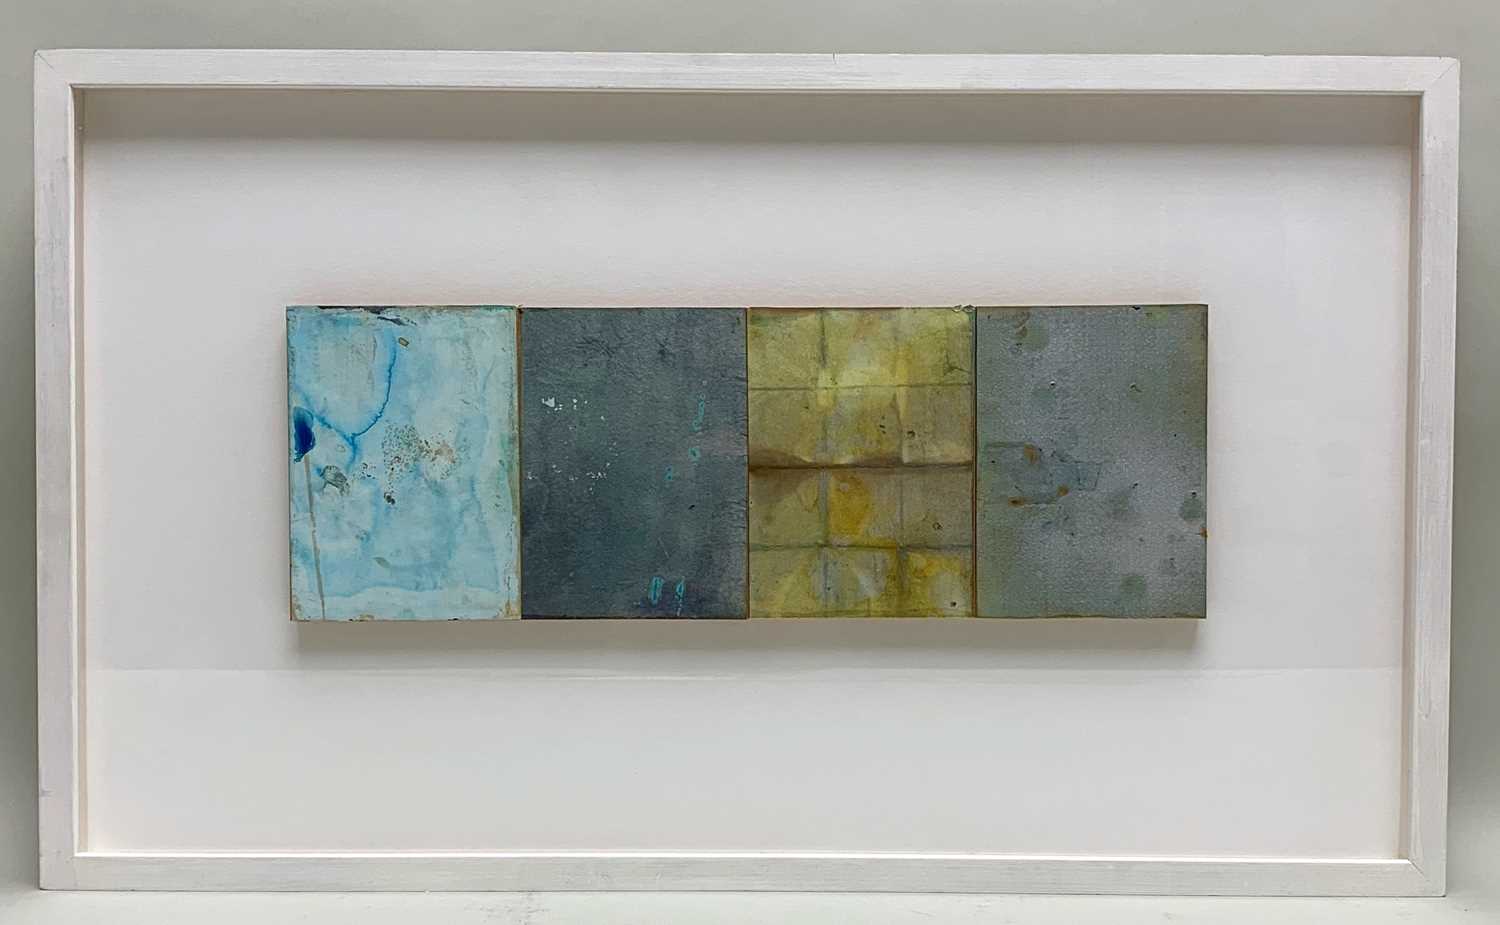 ‡ DAVID QUINN (Irish, b. 1971) mixed media collage - signed and dated 2004, 14 x 42cm, in box frame - Image 2 of 3